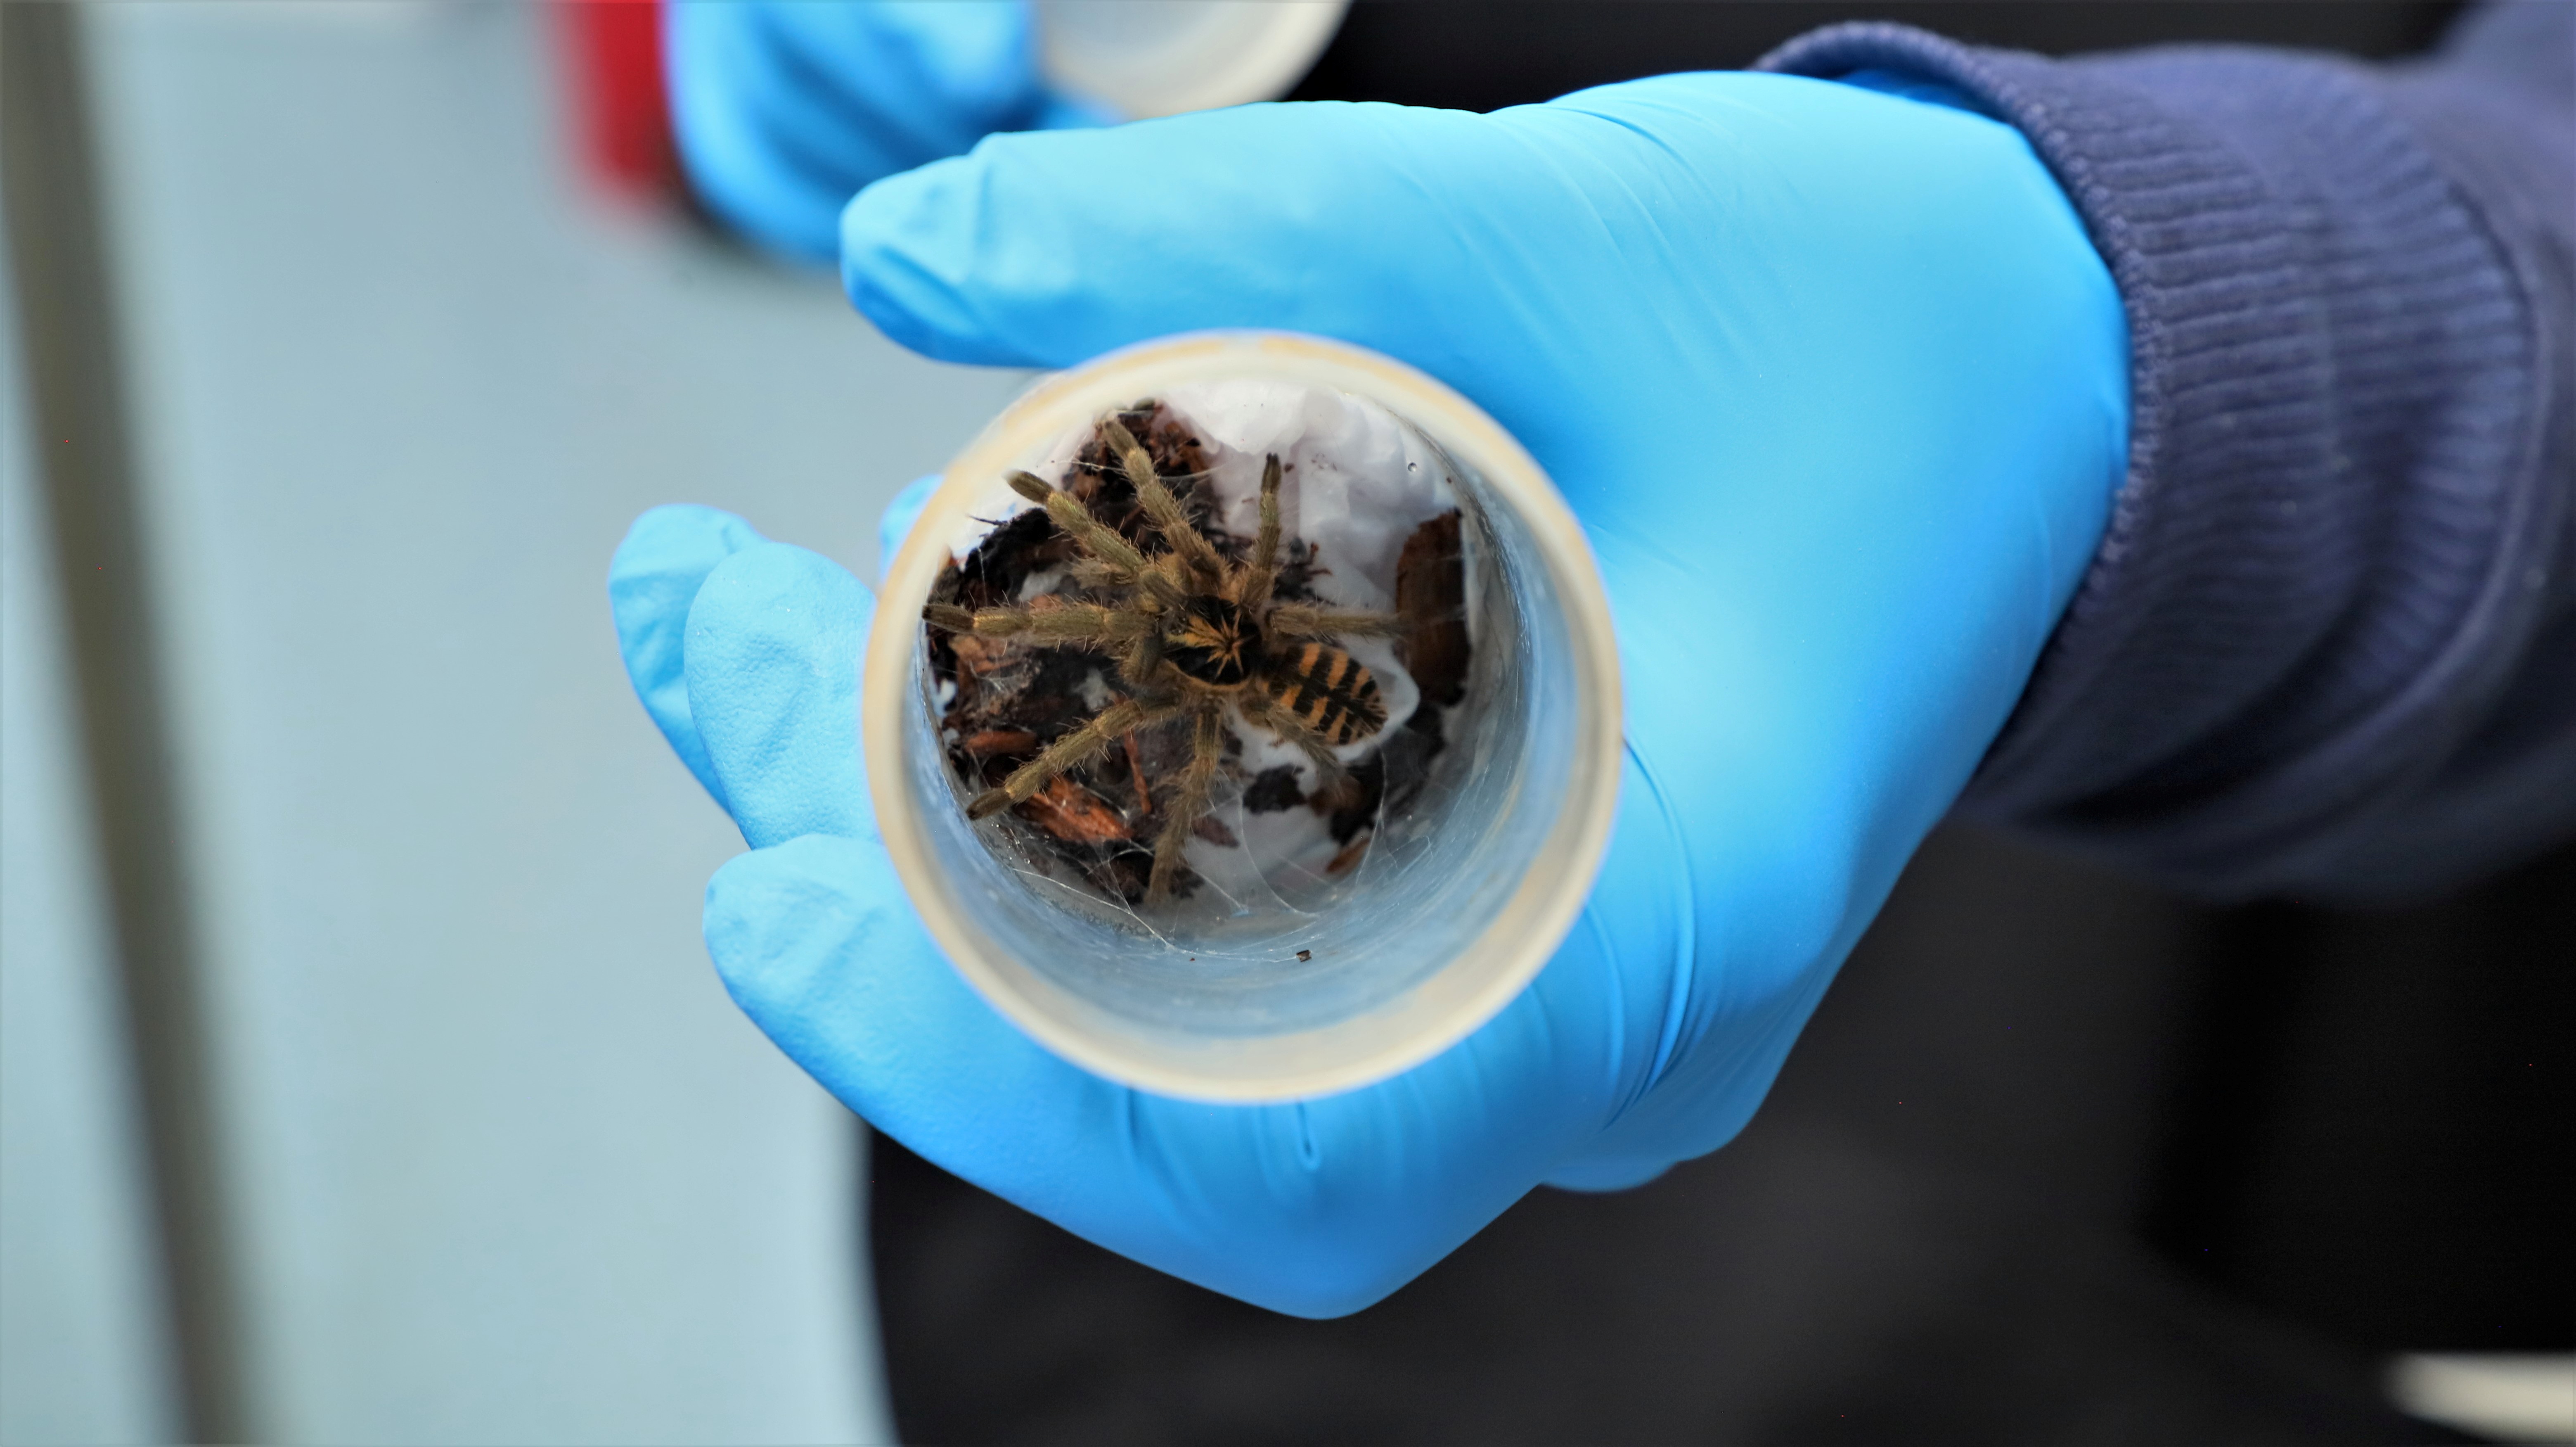 A tarantula is photographed after a seizure of animals for trafficking bound to Germany at El Dorado airport, in Bogota, Colombia December 1, 2021. Courtesy of District Secretary of the Environment of Bogota/Handout via REUTERS